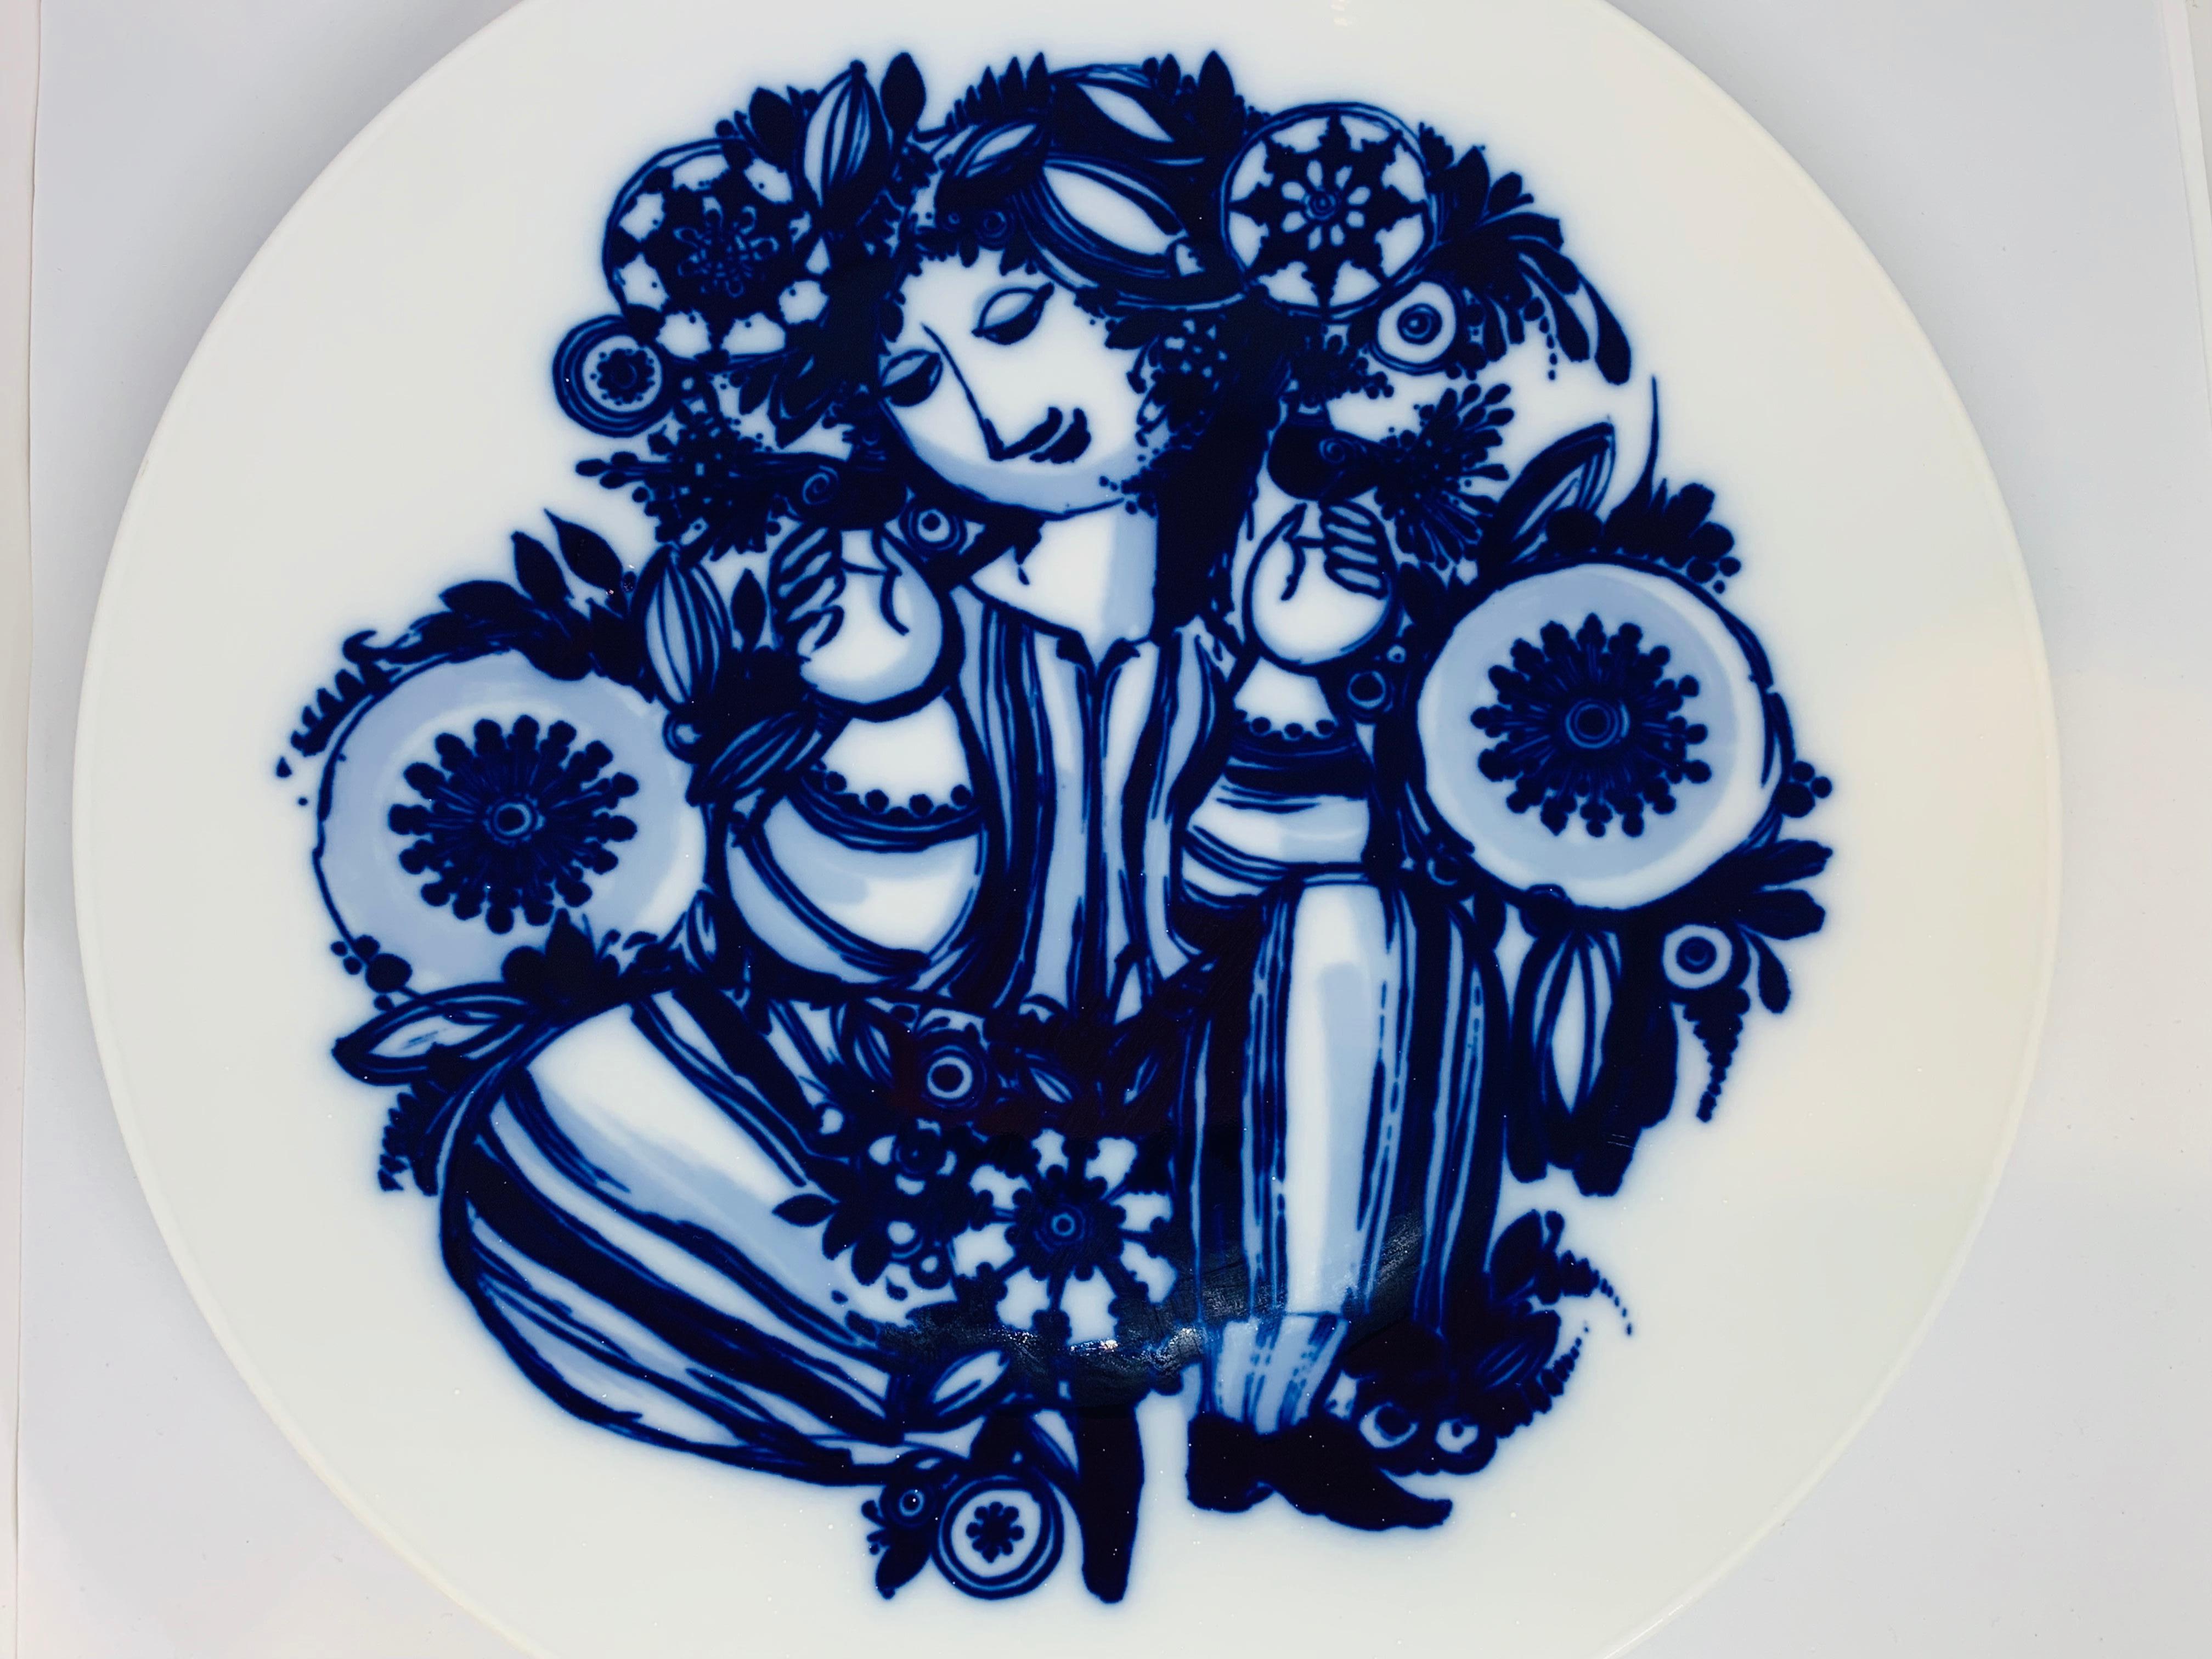 A rare to find Rosenthal Studio Line Germany large porcelain charger, wall plate/plaque, designed by Björn Wiinblad in cobalt blue and white. 

The reverse of the plate is marked: Rosenthal. Studio-linie. Germany. Neue Heimat and signed but not by